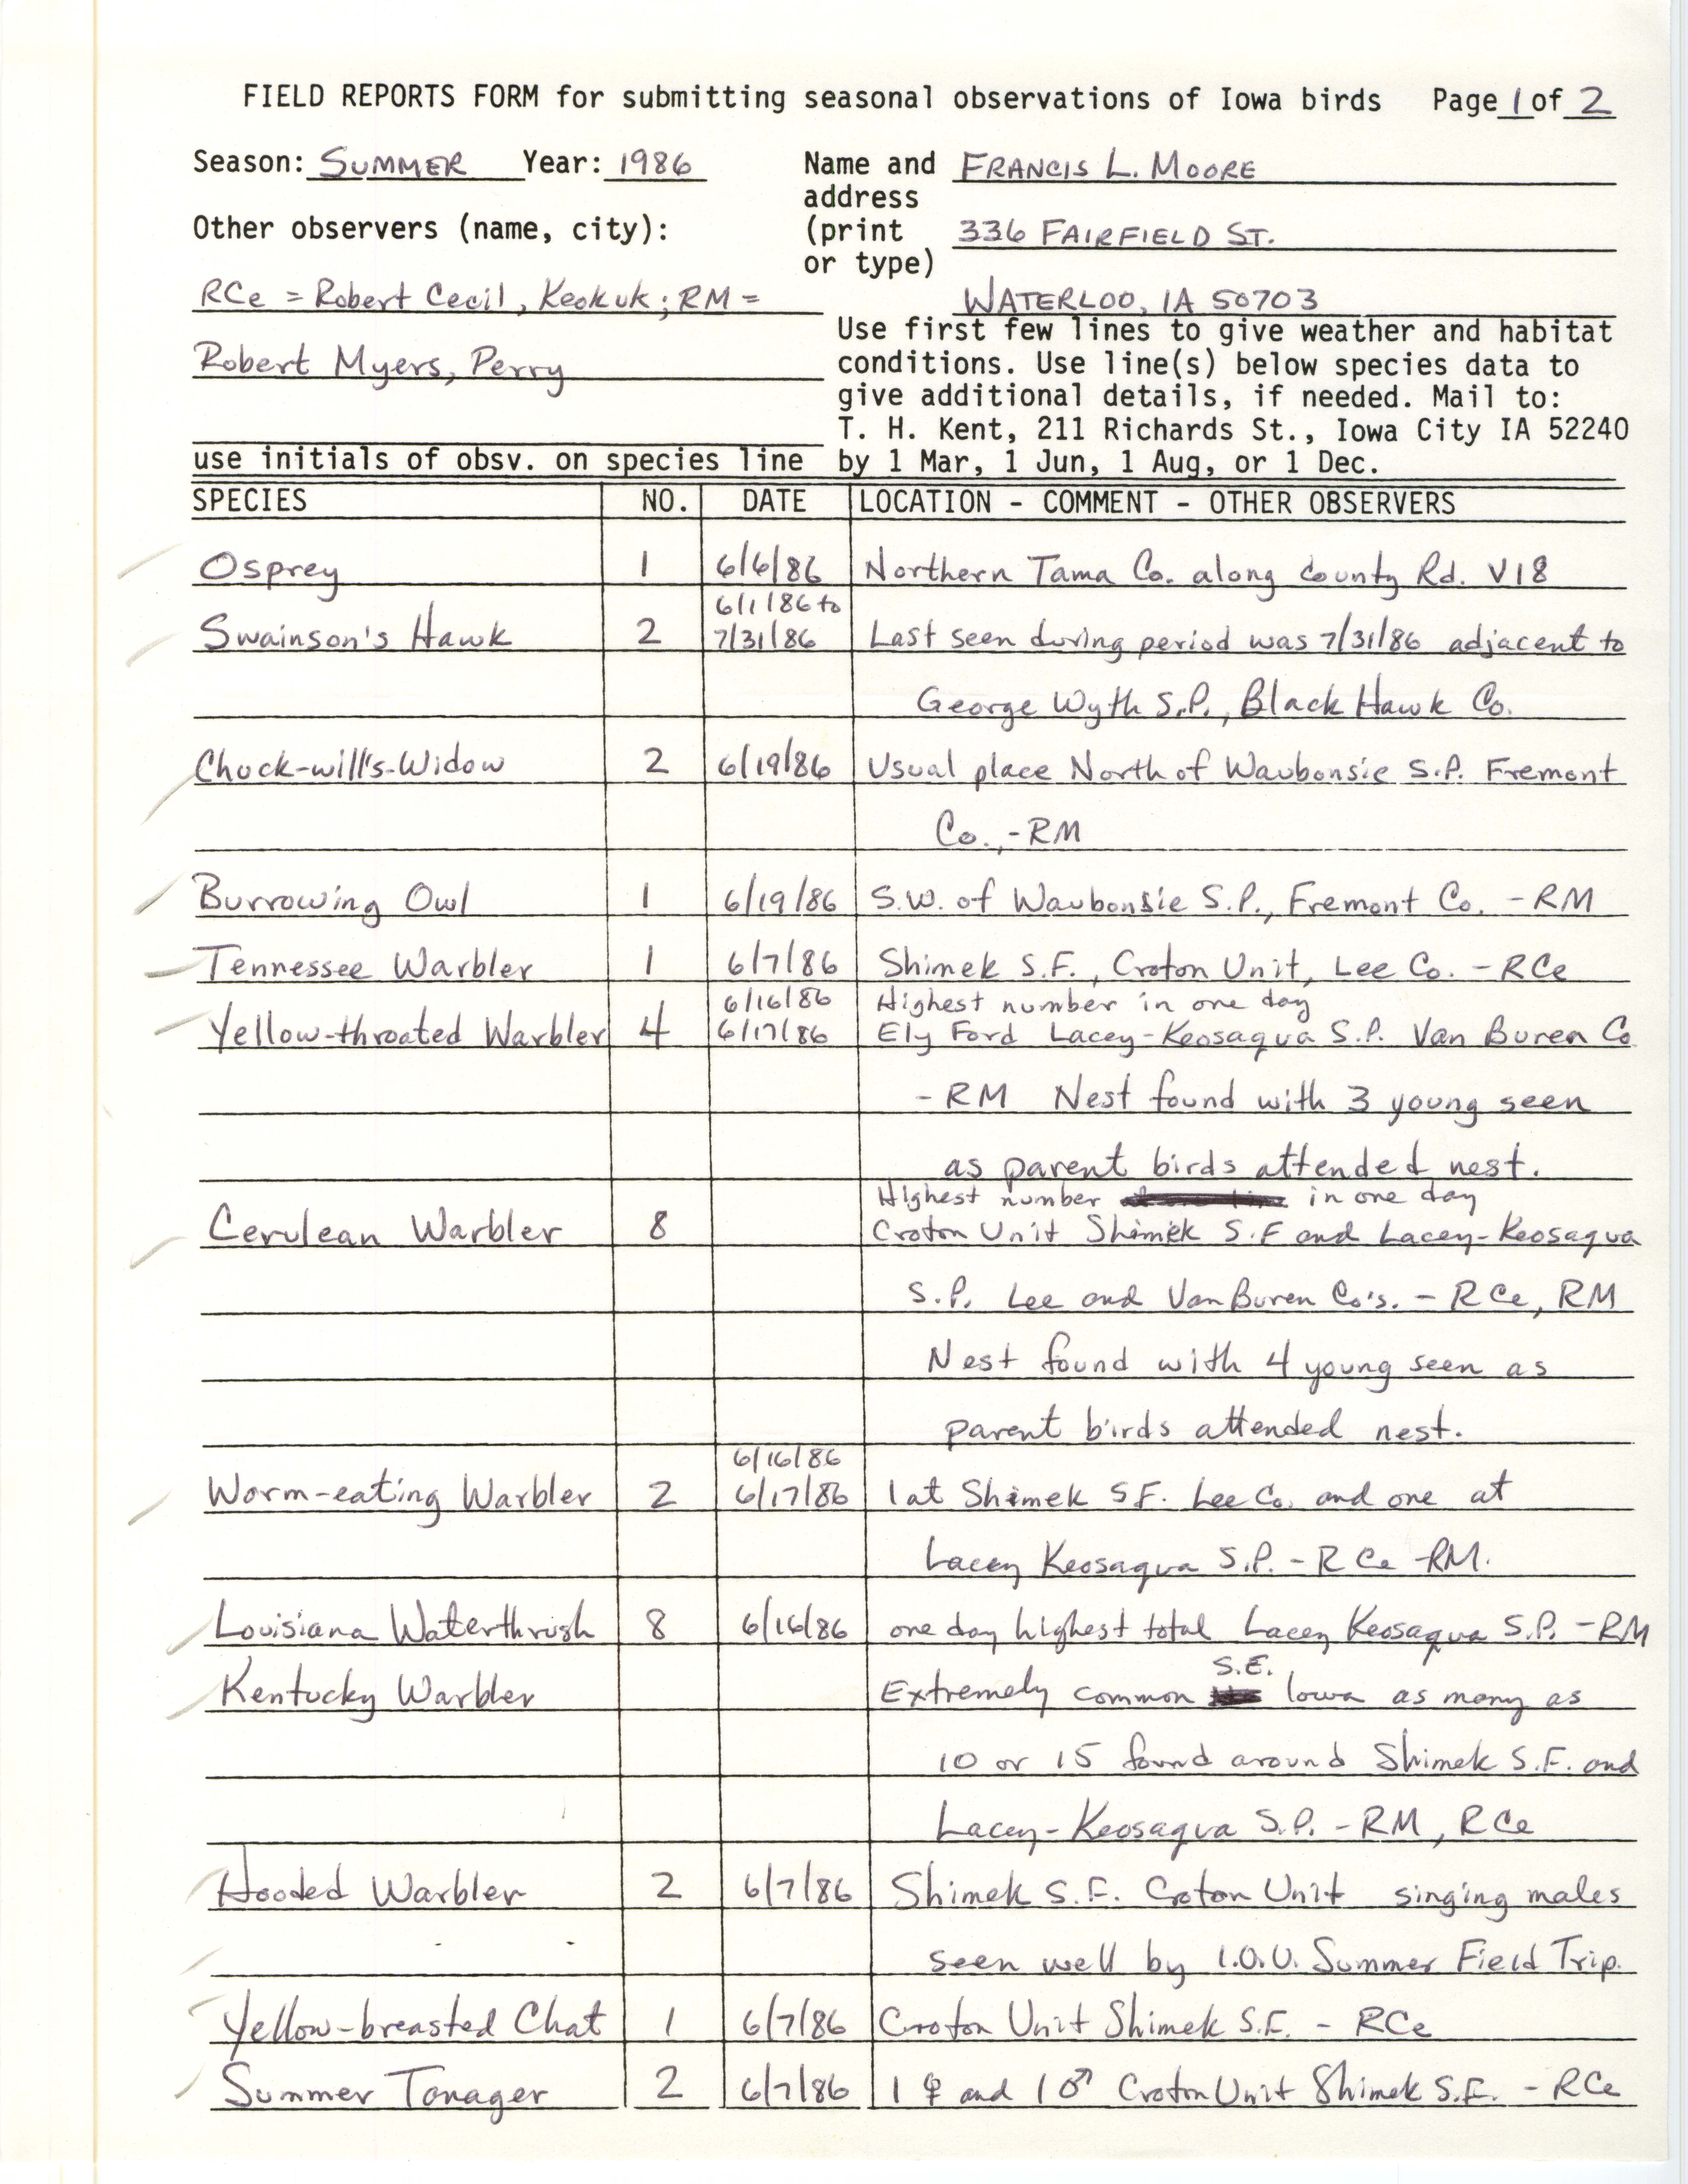 Field reports form for submitting seasonal observations of Iowa birds, Francis L. Moore, summer 1986